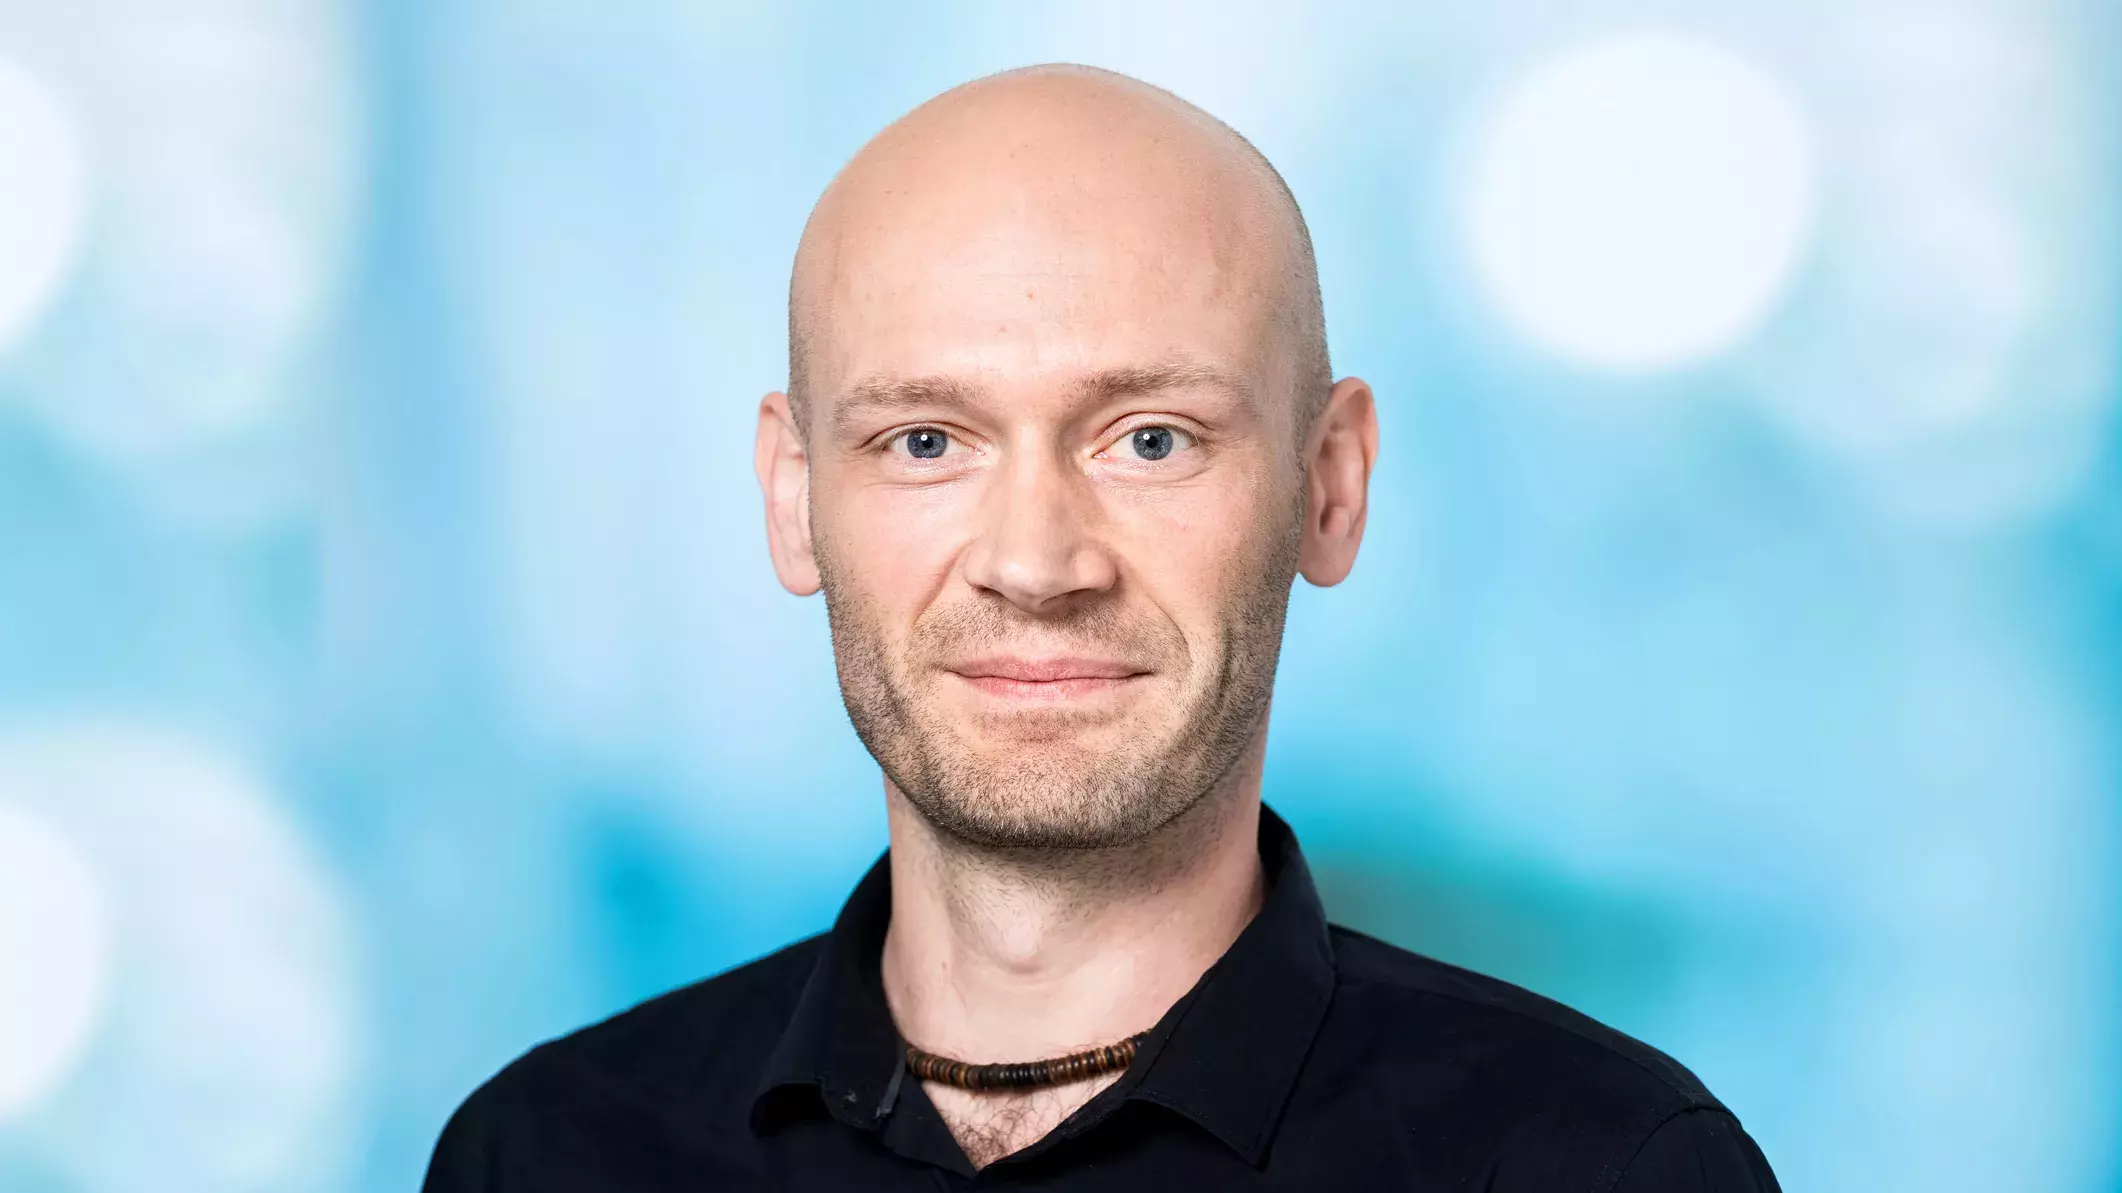 Dr. Martin Rerabek is an experienced researcher with more than 12 years of practical and academic experience in the field of machine learning using python. He works in the research group "Predictive Analytics" at the Institute for Applied Simulation.